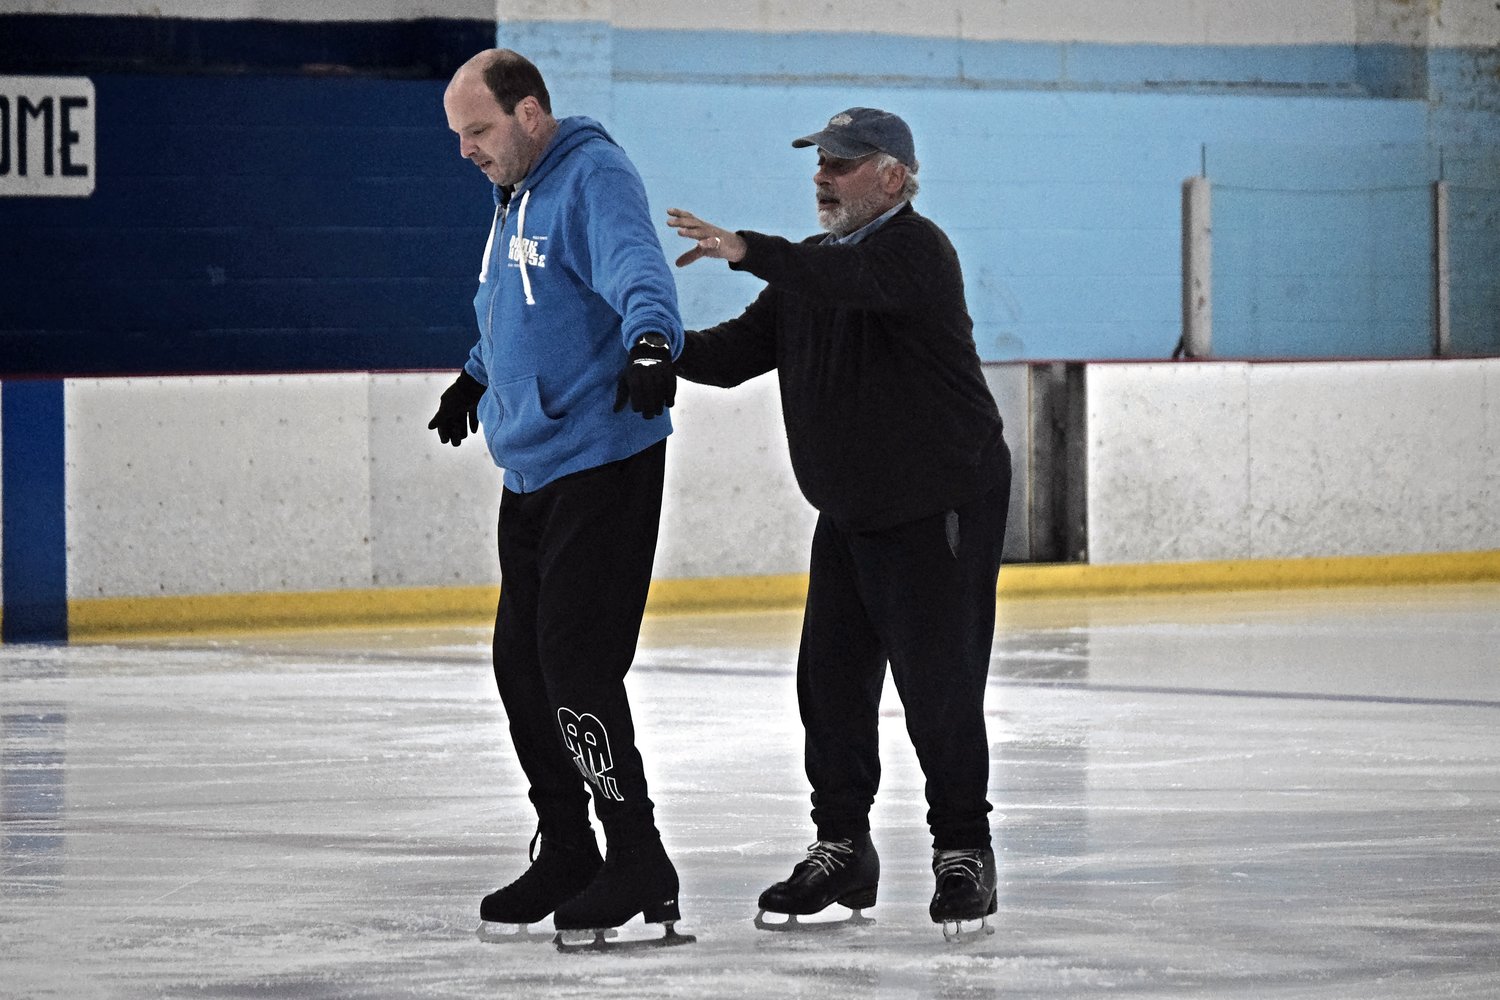 Mark Getman received hands-on instruction from his coach, Adam Leib, at Iceland skating rink on June 9.